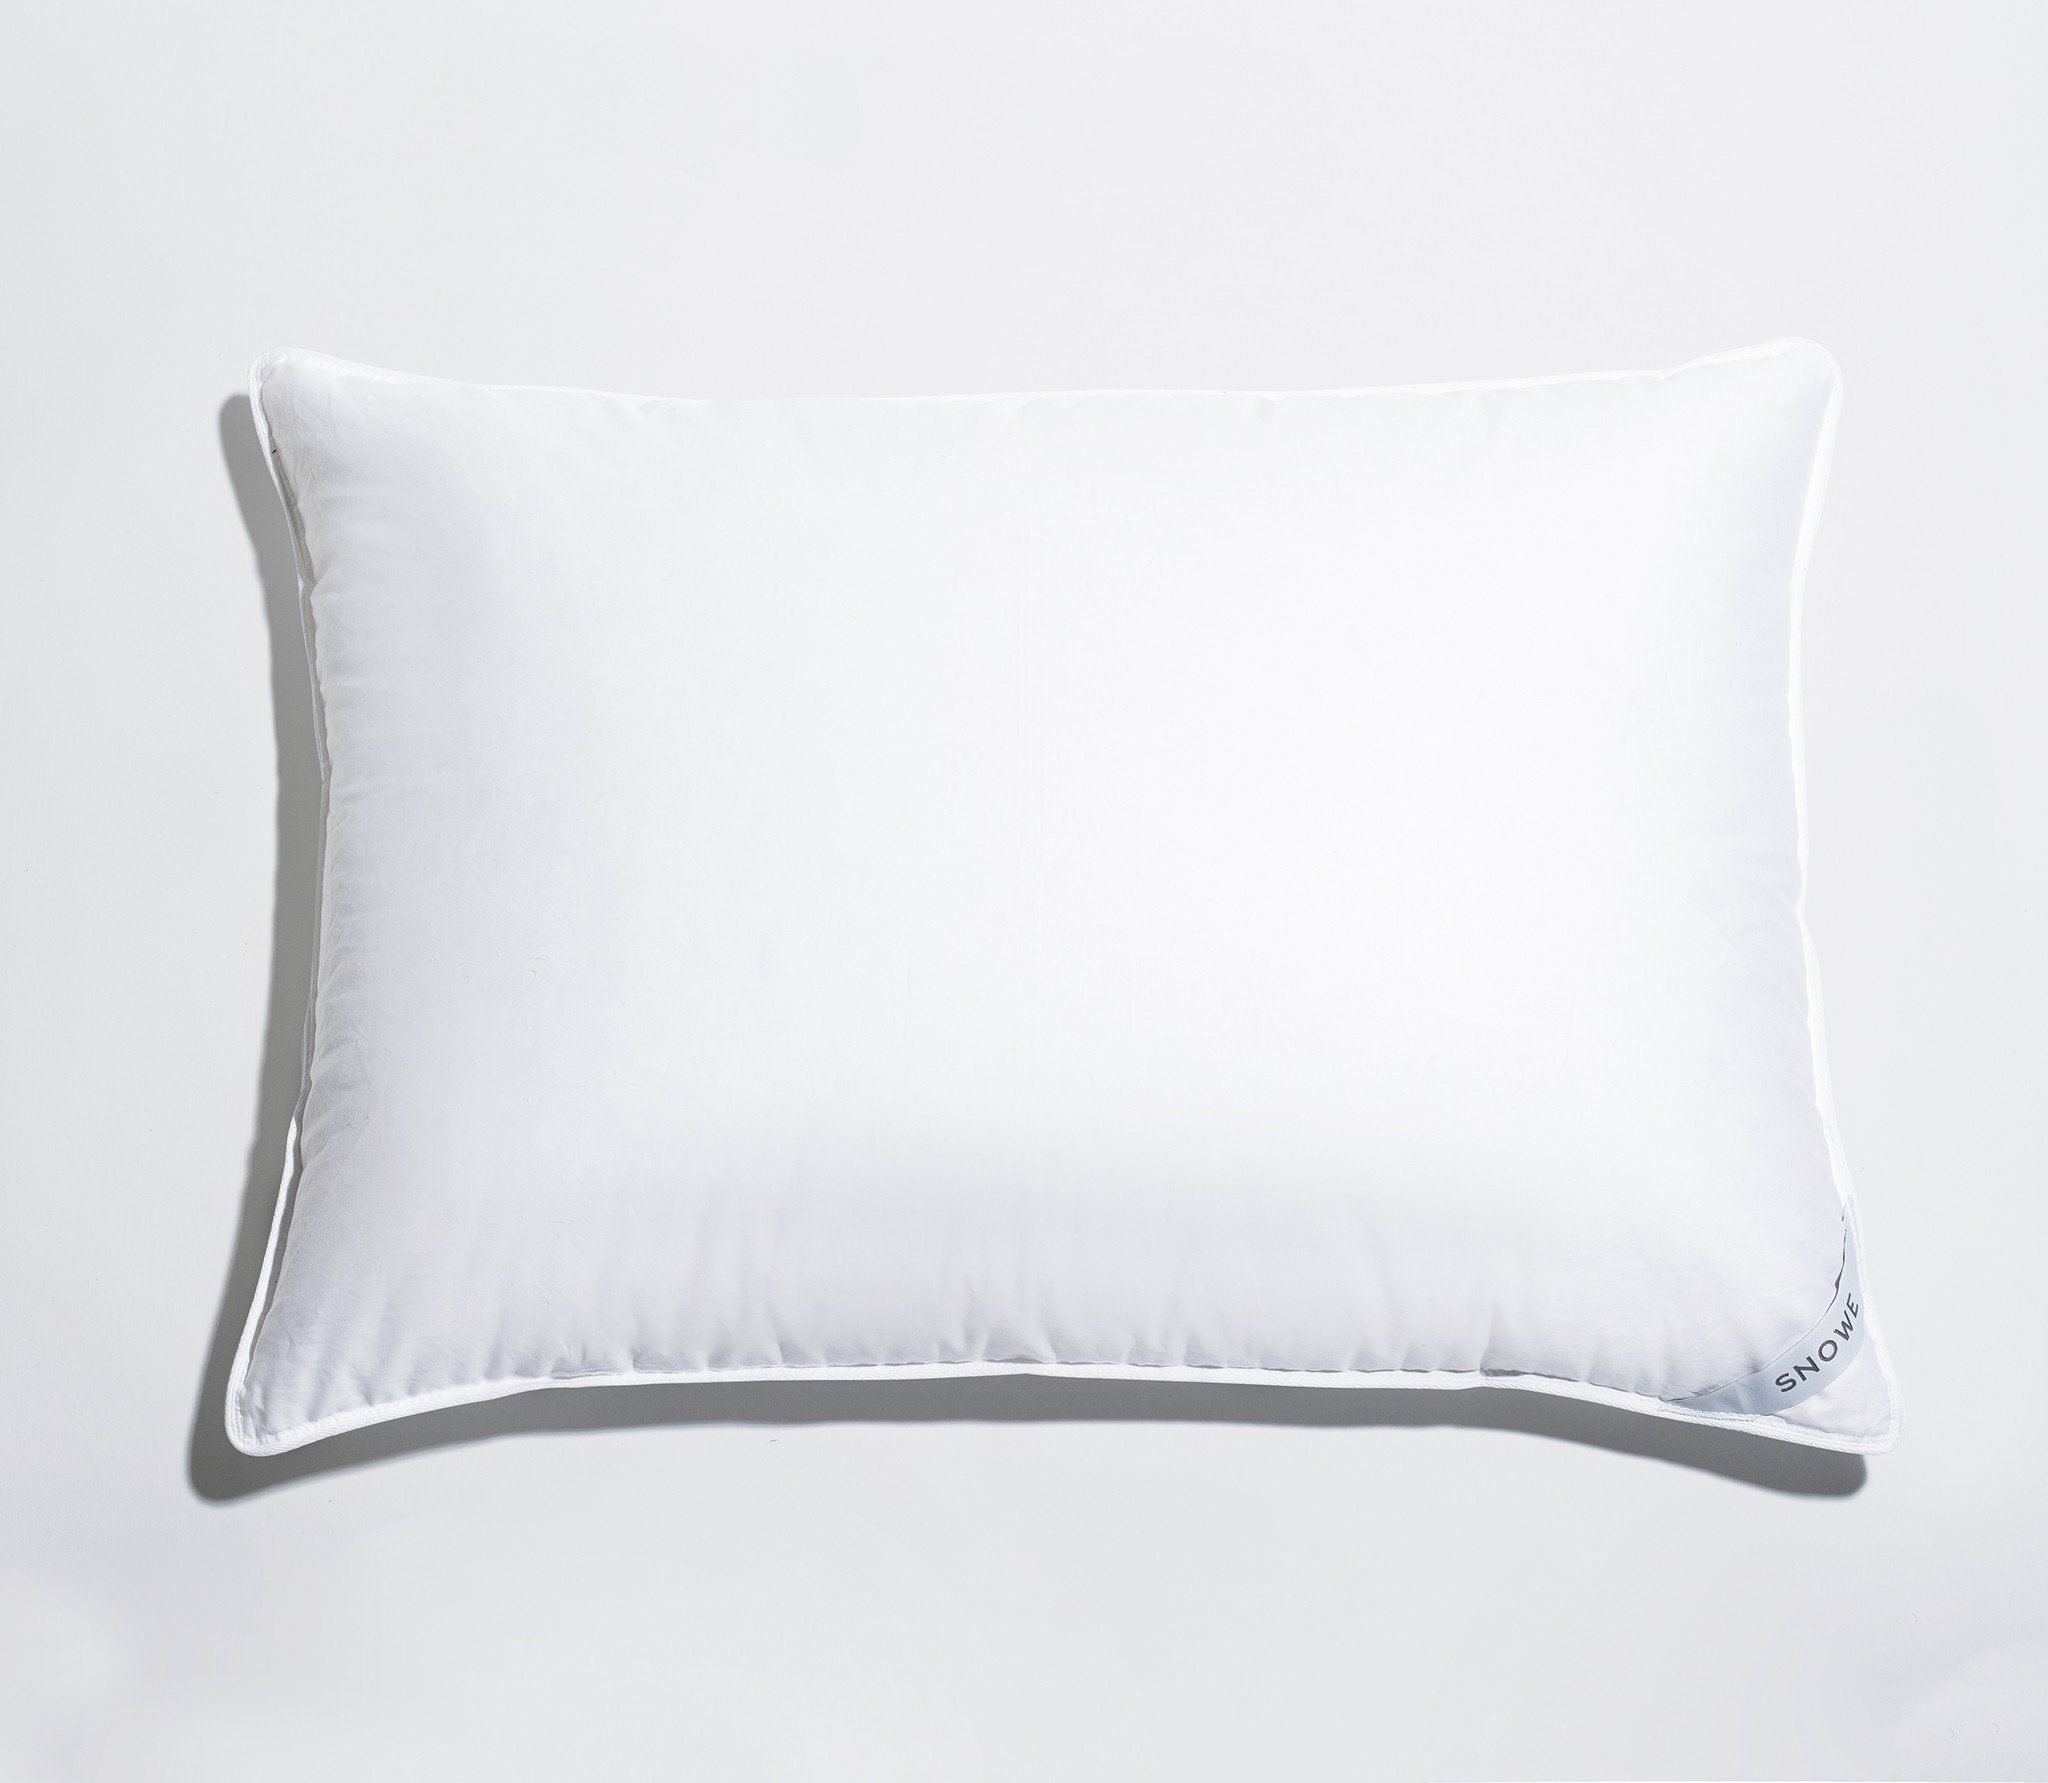 best reasonably priced pillows